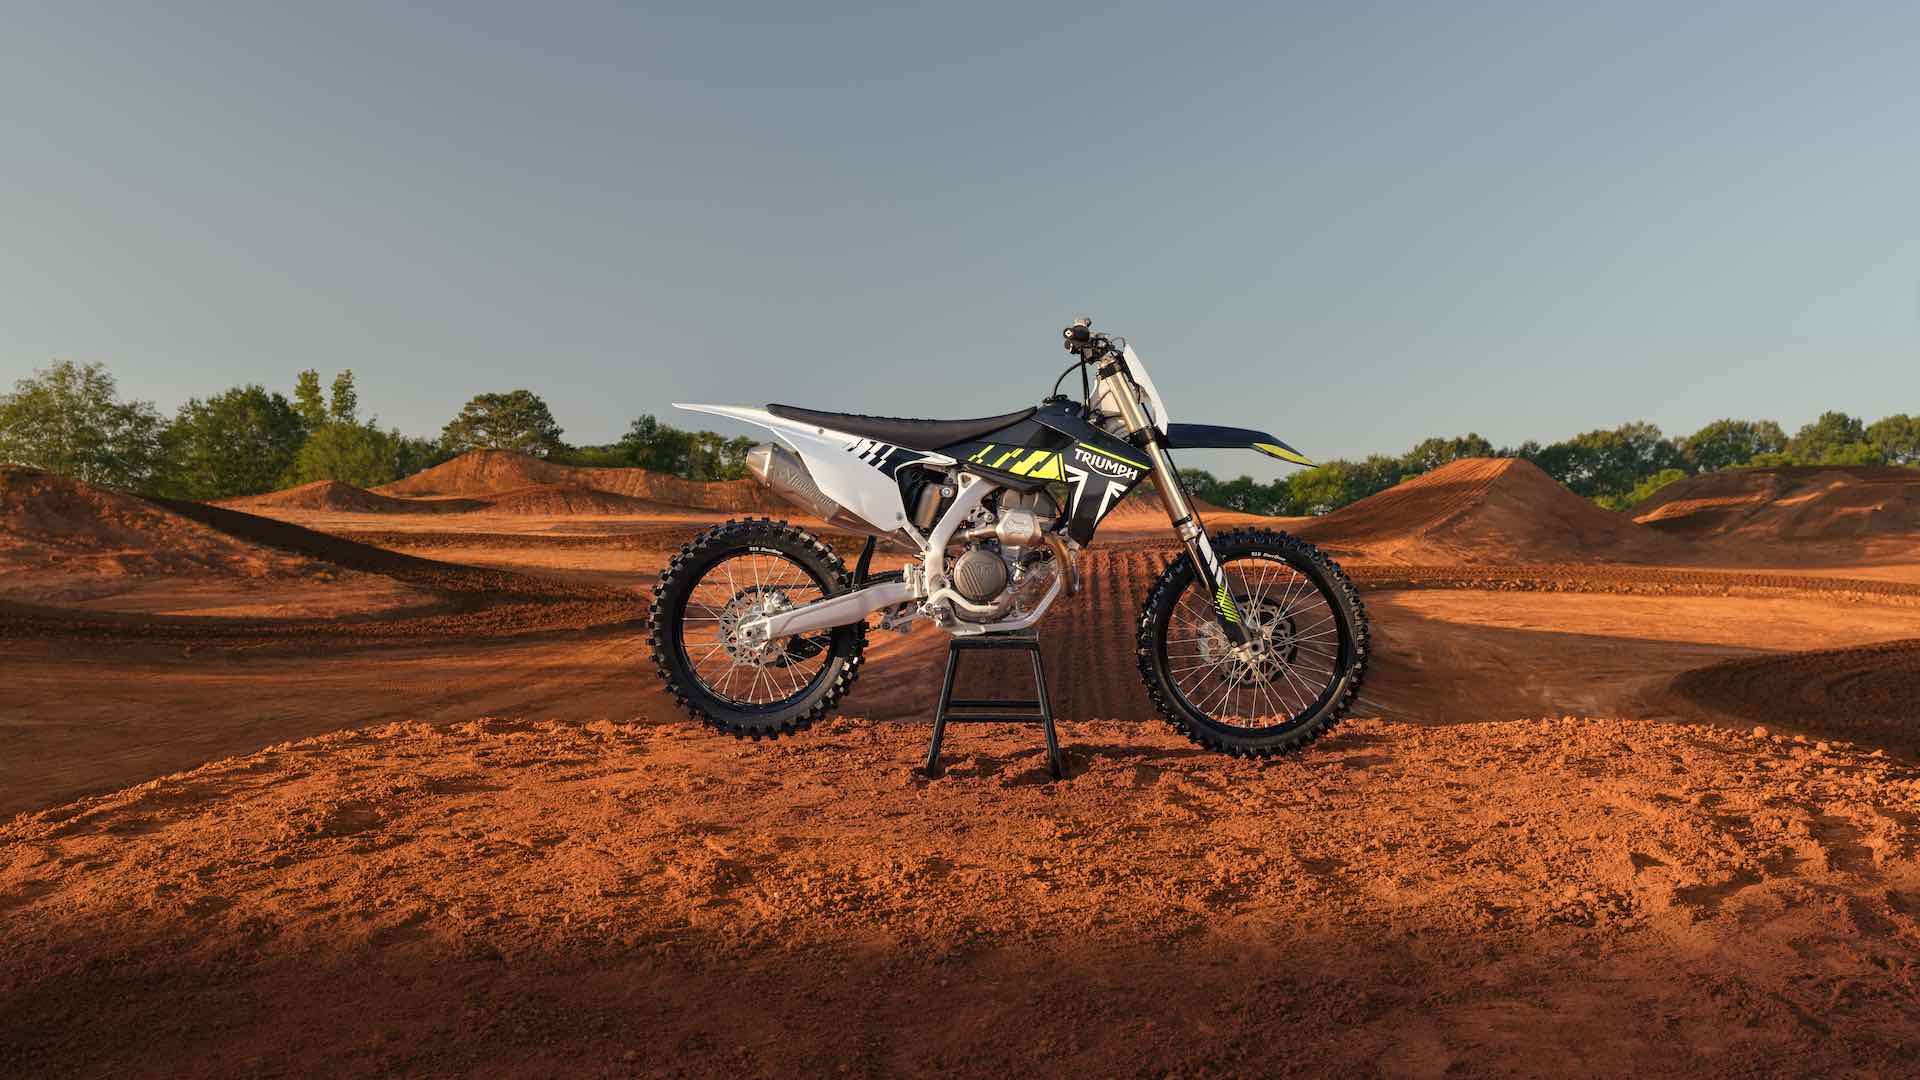 Triumph shakes up motocross with the powerful TF 250-X